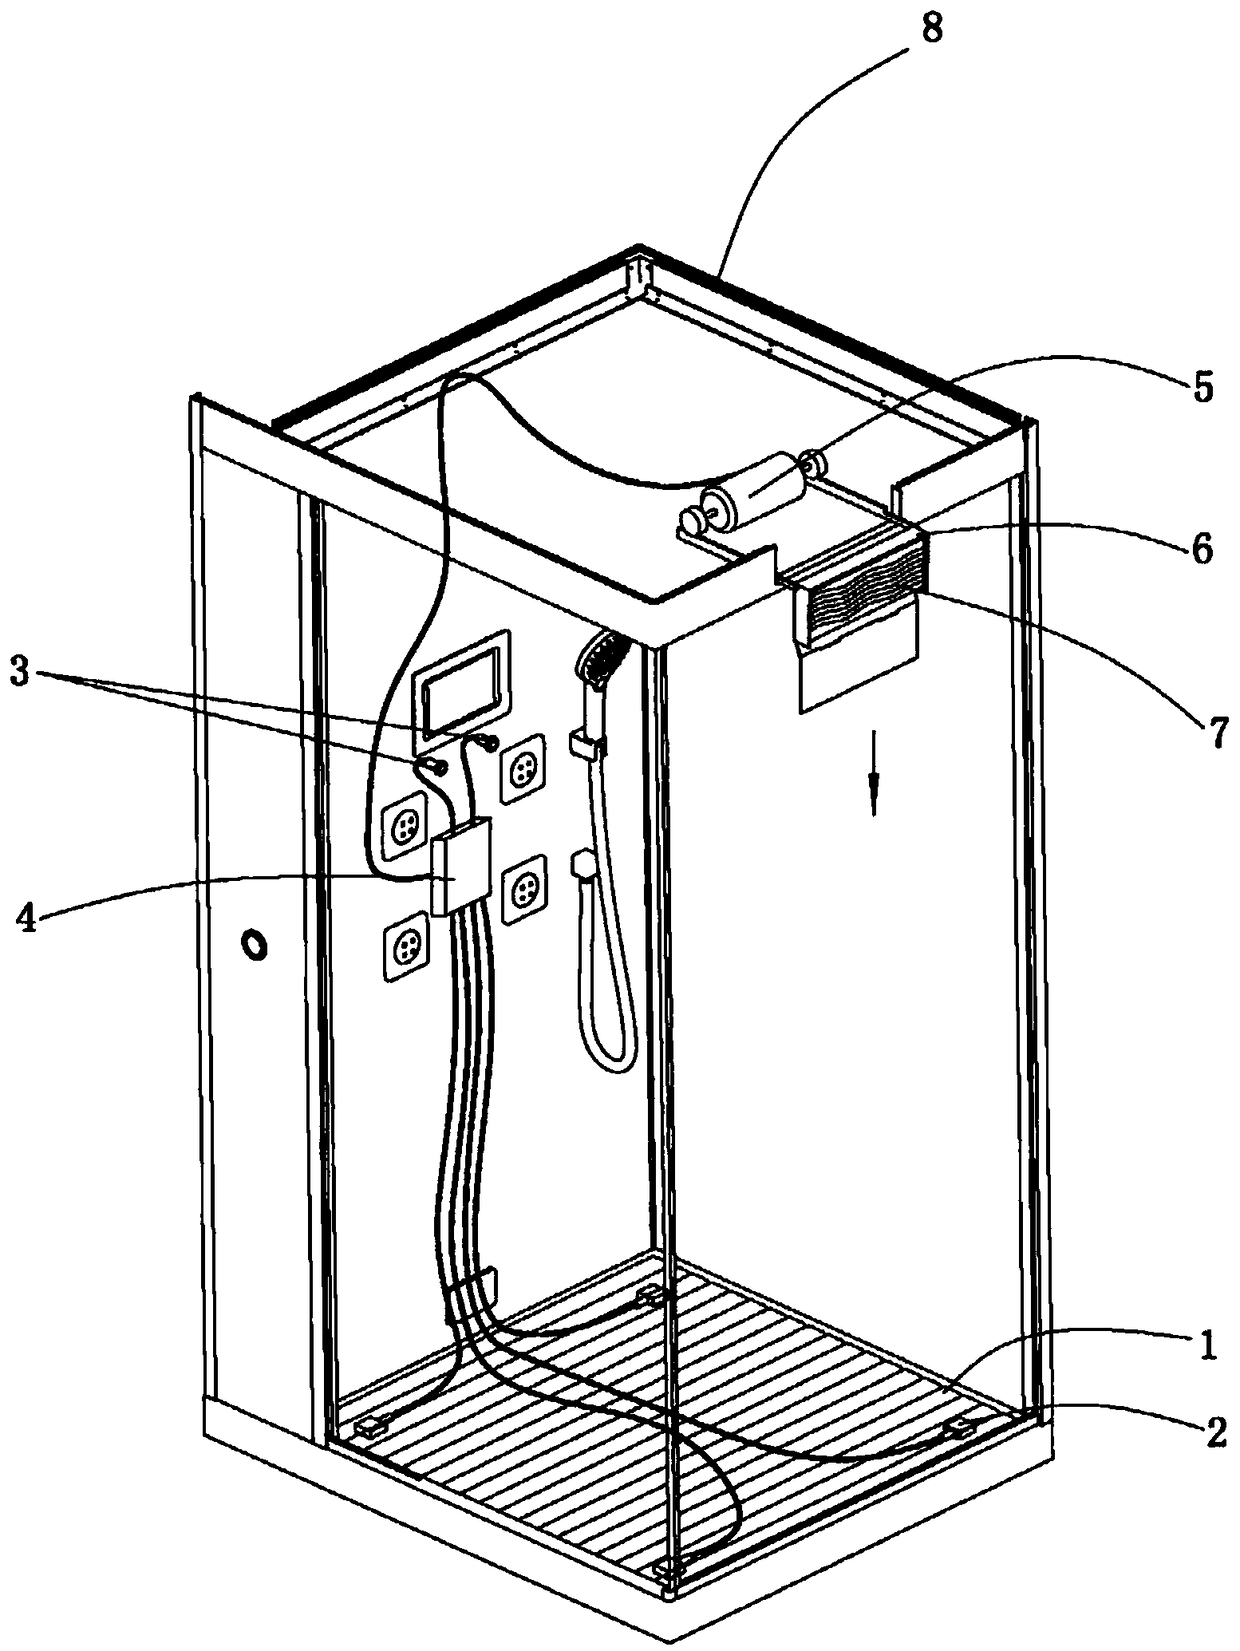 Falling-down alarm system and method for shower room